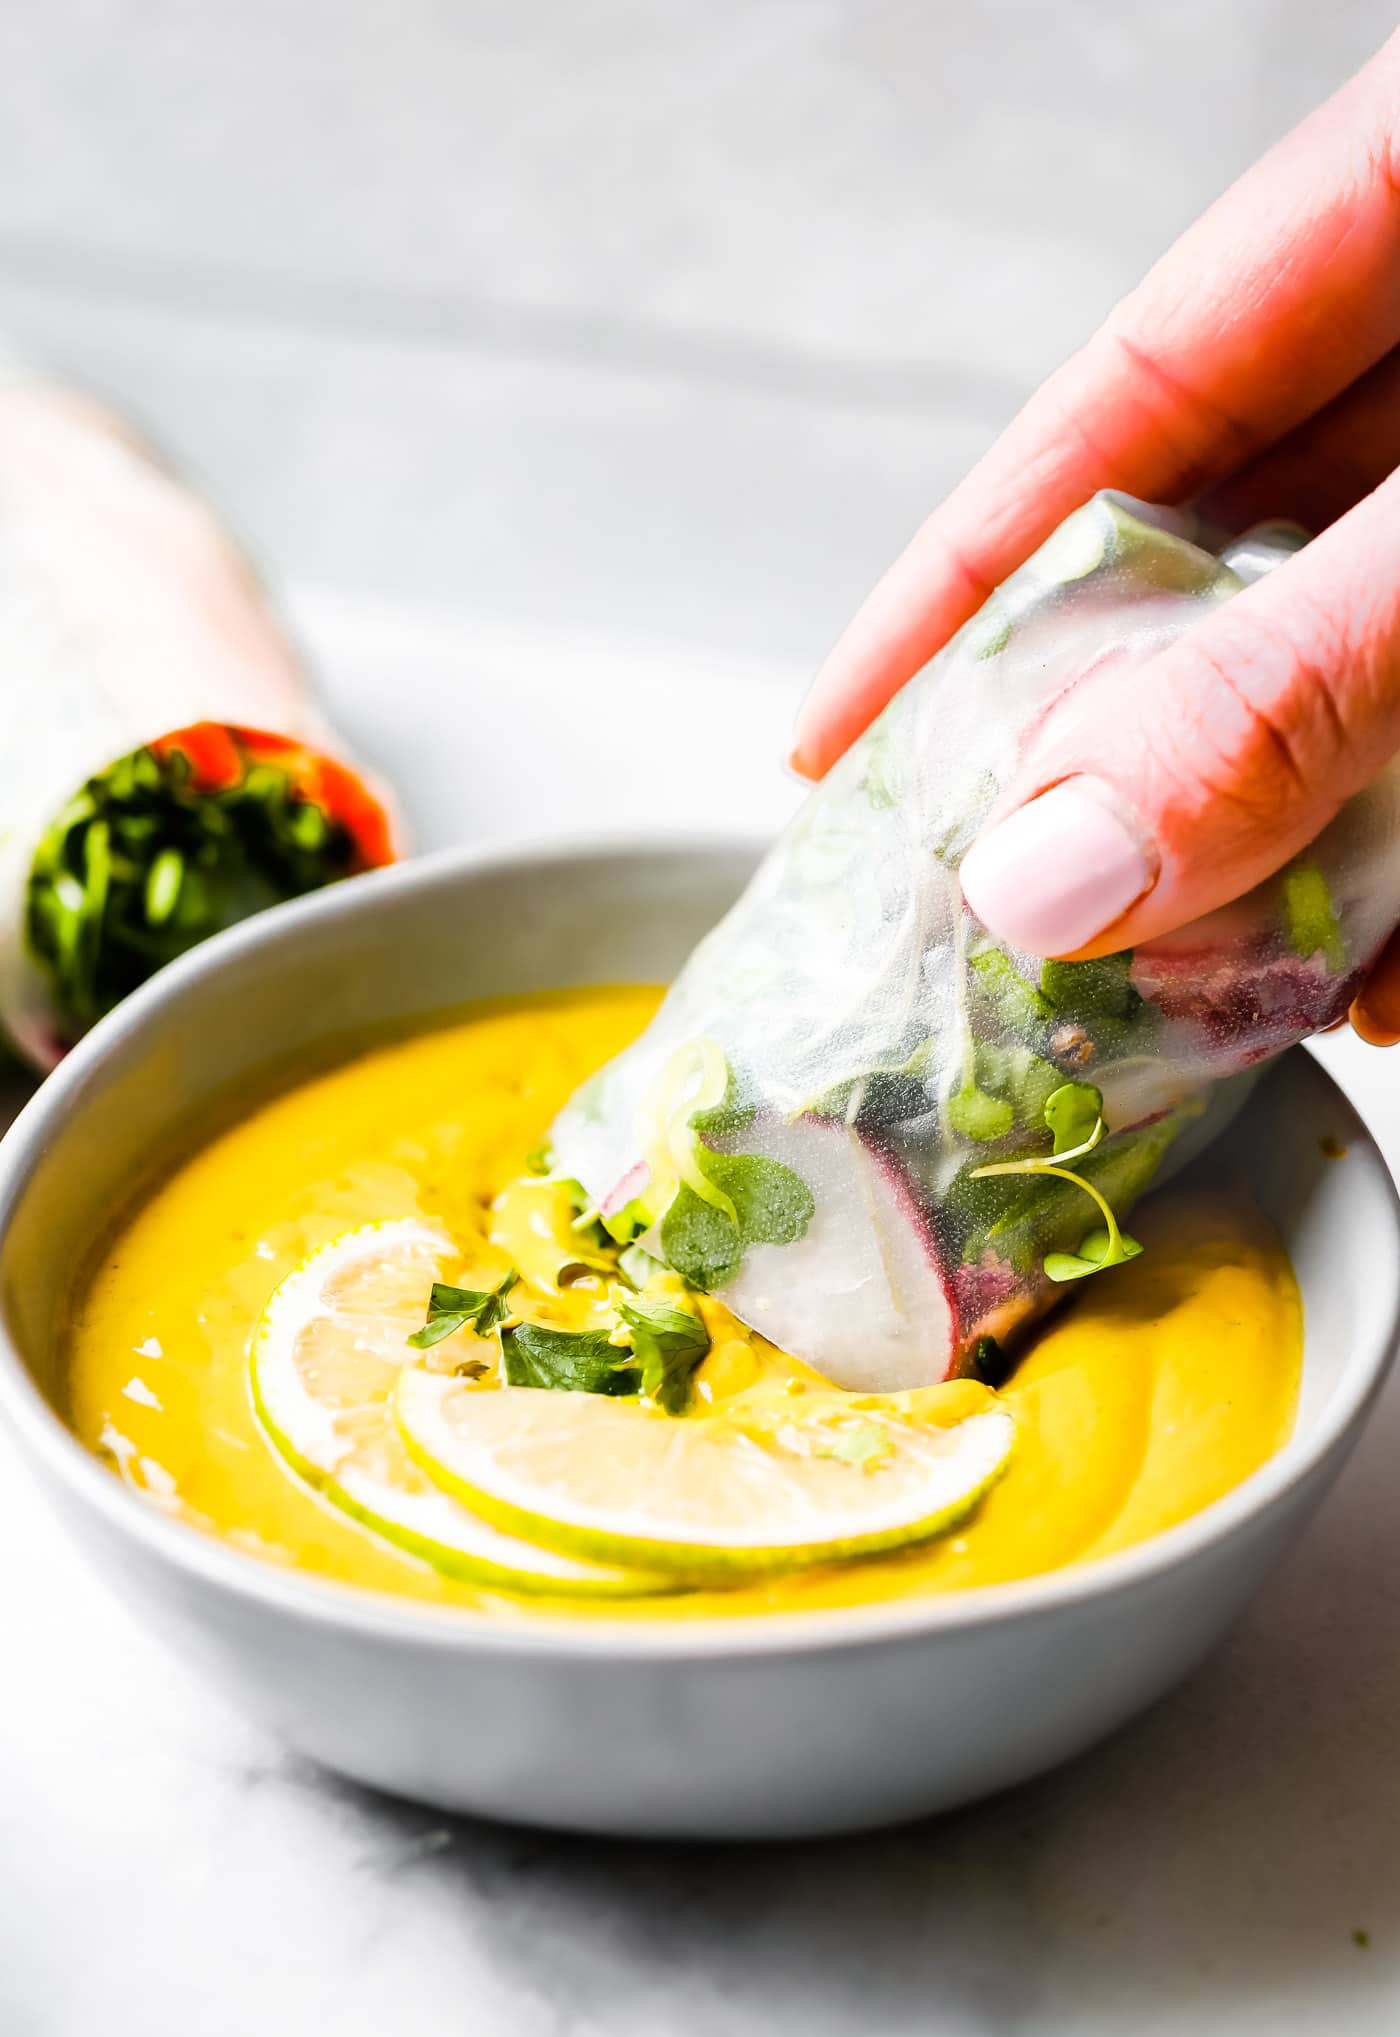 A spring roll being dipped into a bowl of ginger curry sauce.